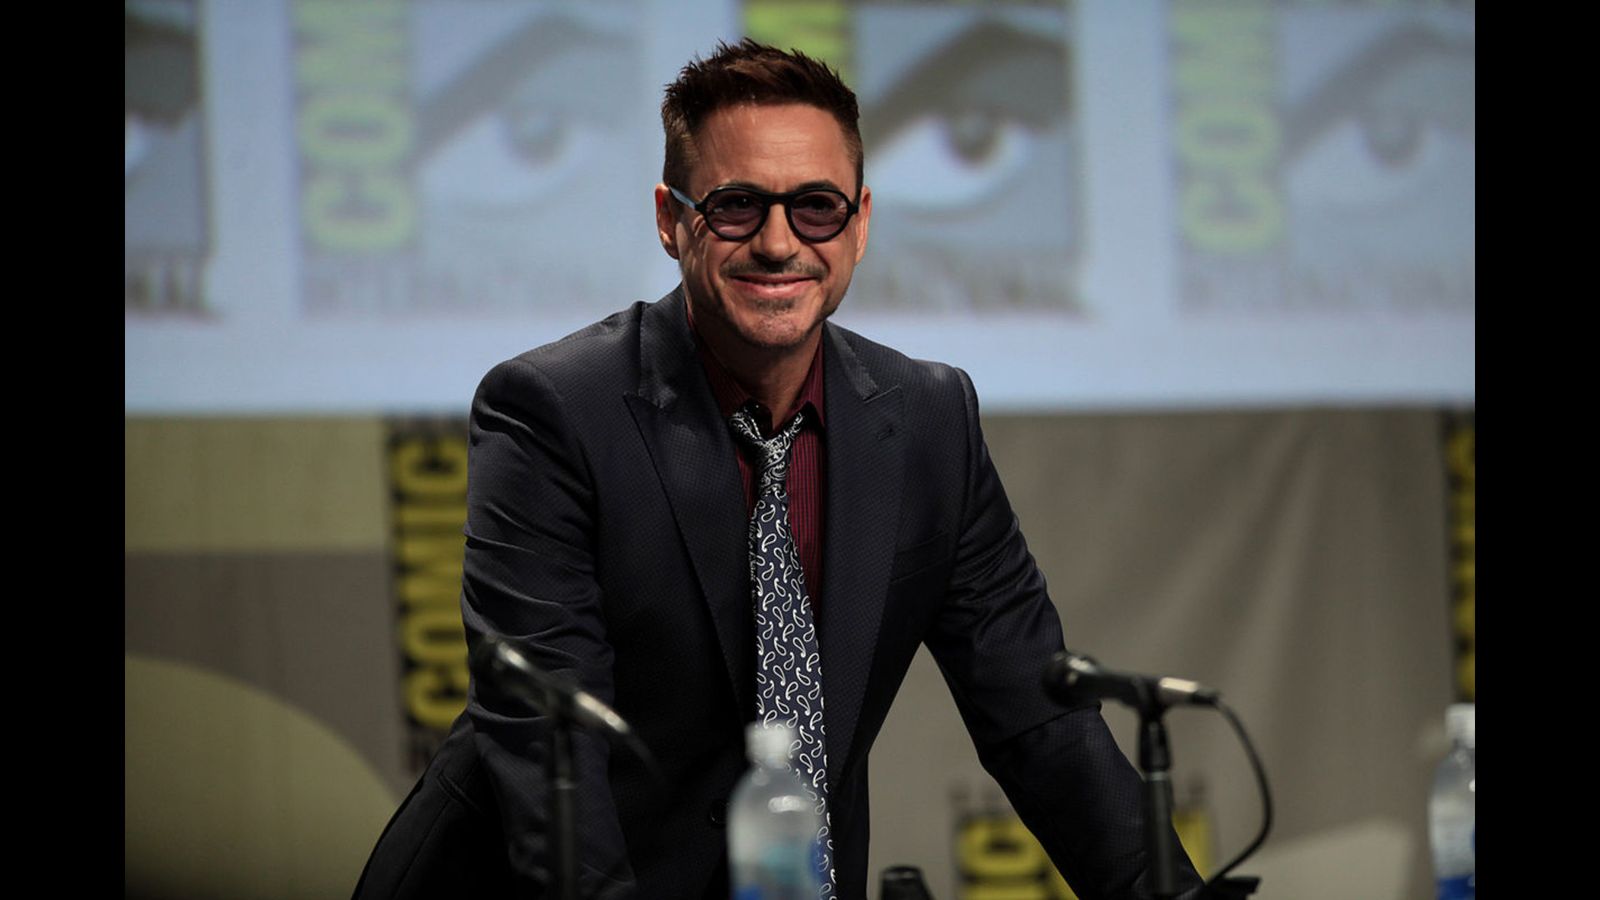 Robert Downey, Jr. speaking at the 2014 San Diego Comic Con International, for "Avengers: Age of Ultron", at the San Diego Convention Center in San Diego, California.